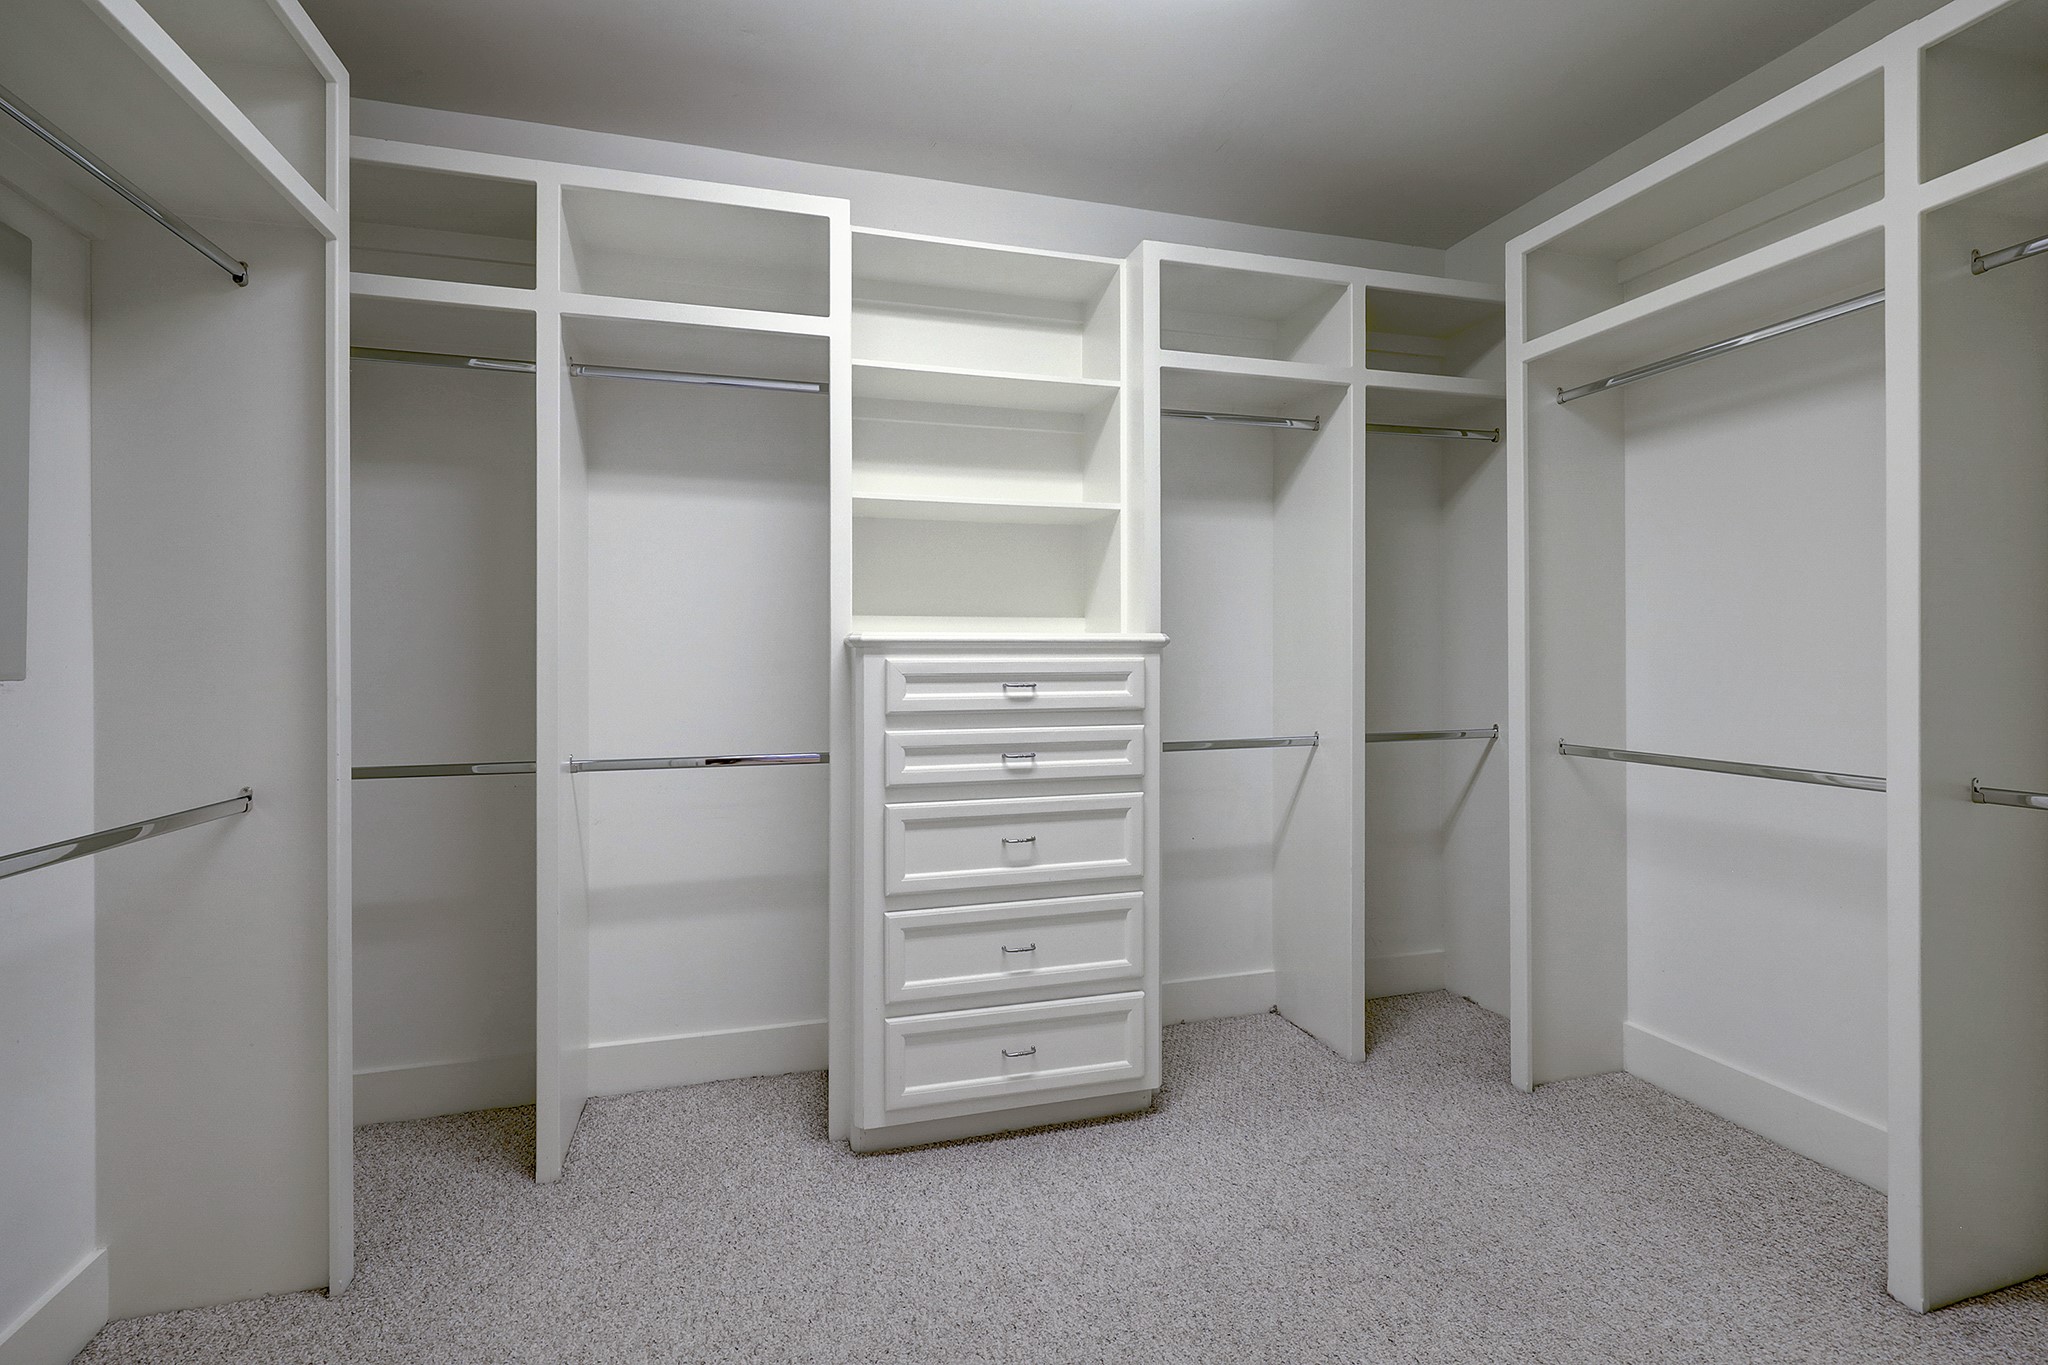 Huge primary closet with extensive shelving and great storage.